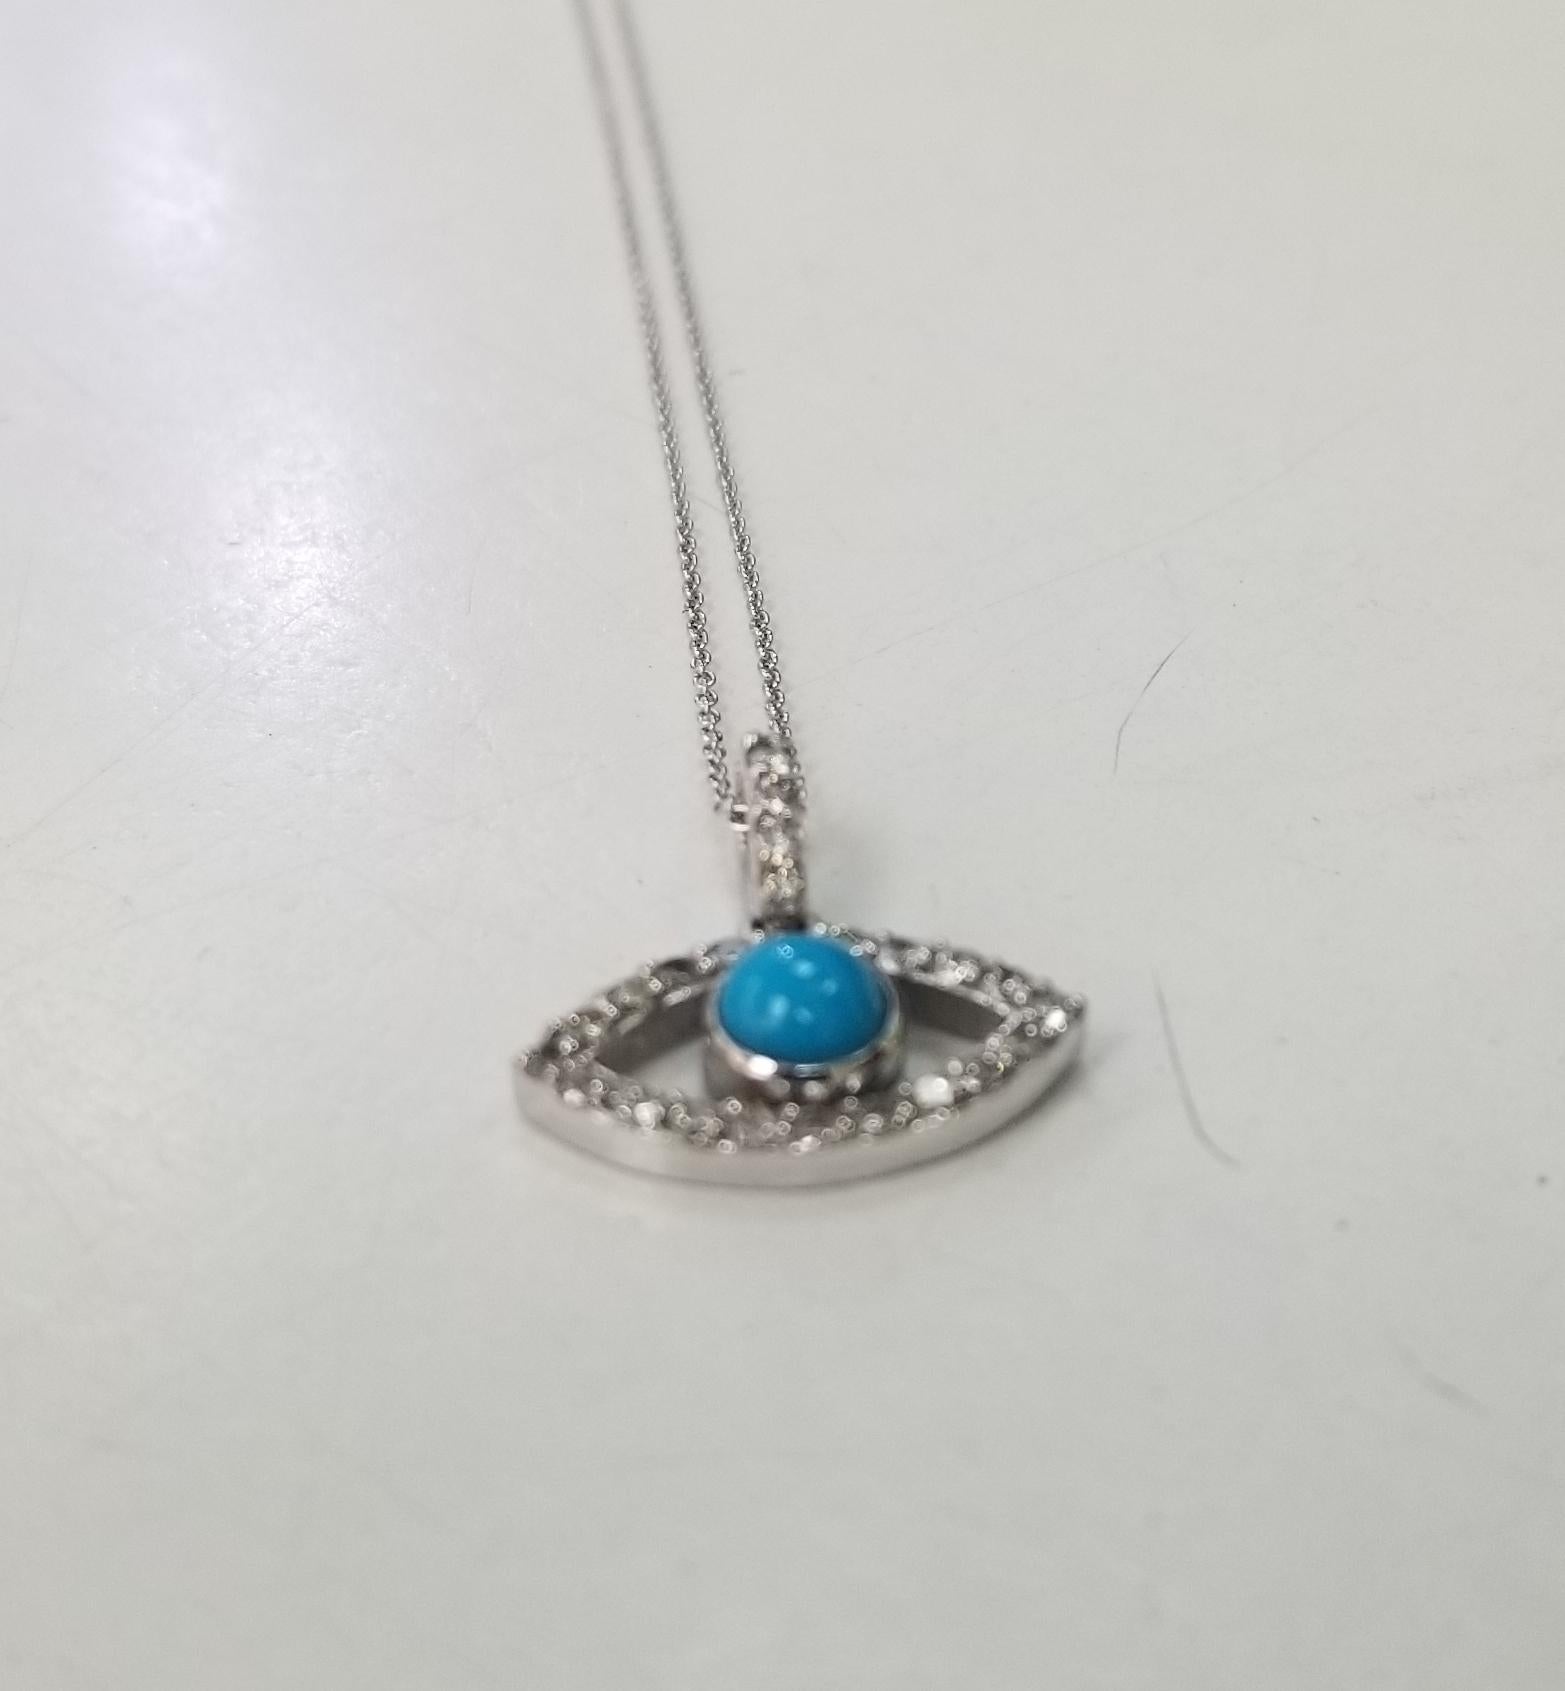 Total Carat Weight:APPROX 0.35CT
Style:Chain
WEIGHT:3GR
Base Metal:Gold
Diamond Clarity Grade:Slightly Included (SI1)
Setting Style:Prong
Number of Gemstones:25
Type:Necklace
Secondary Stone:Turquoise 
Cut Grade:Very Good
Main Stone Color:NEAR